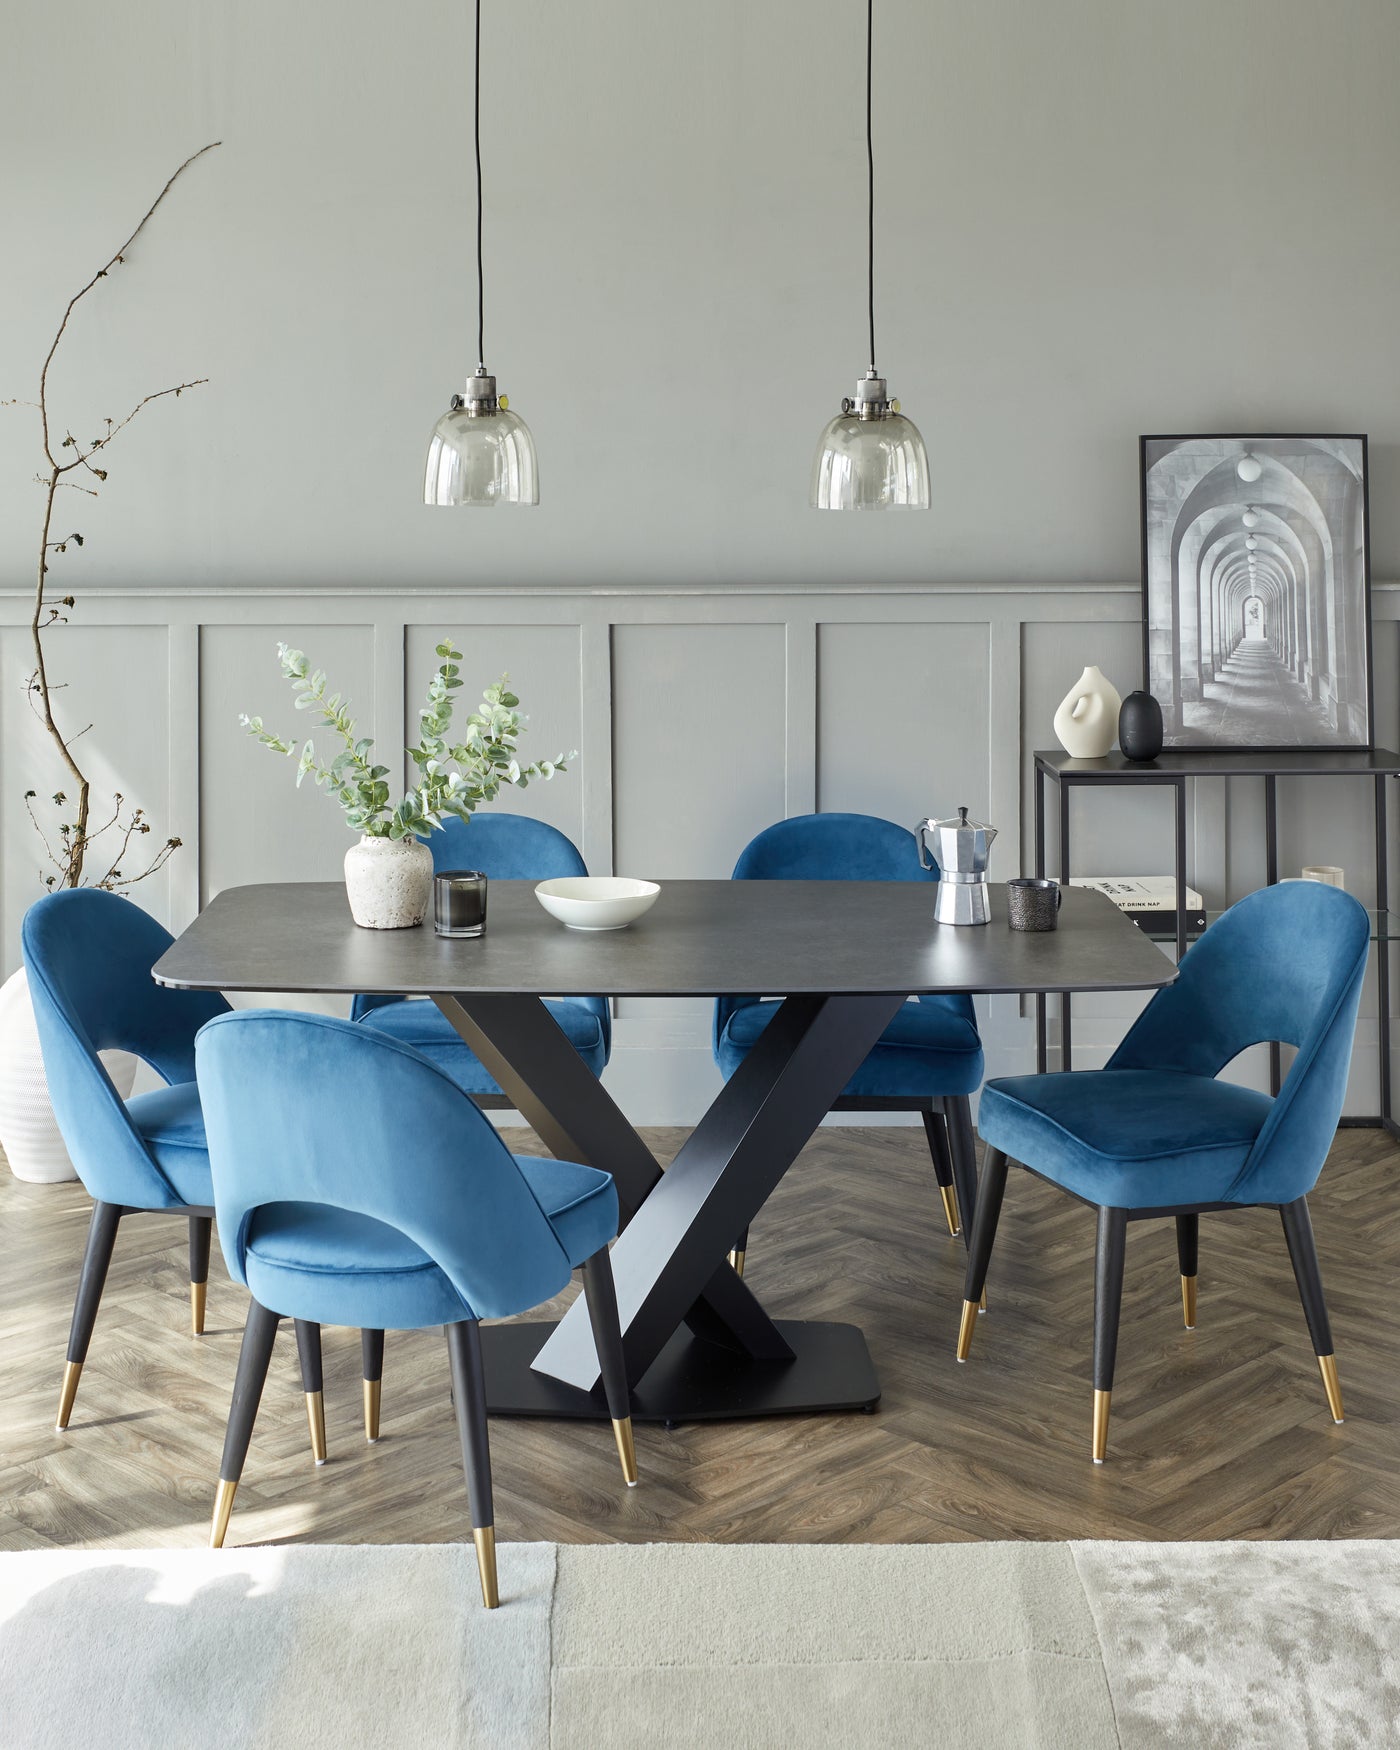 Modern dining room featuring an elegant rectangular black dining table with a unique X-shaped base design. Accompanied by six plush blue velvet dining chairs with black legs tipped with brass accents. The simple yet sophisticated set is complemented by two clear glass pendant lights above the table.